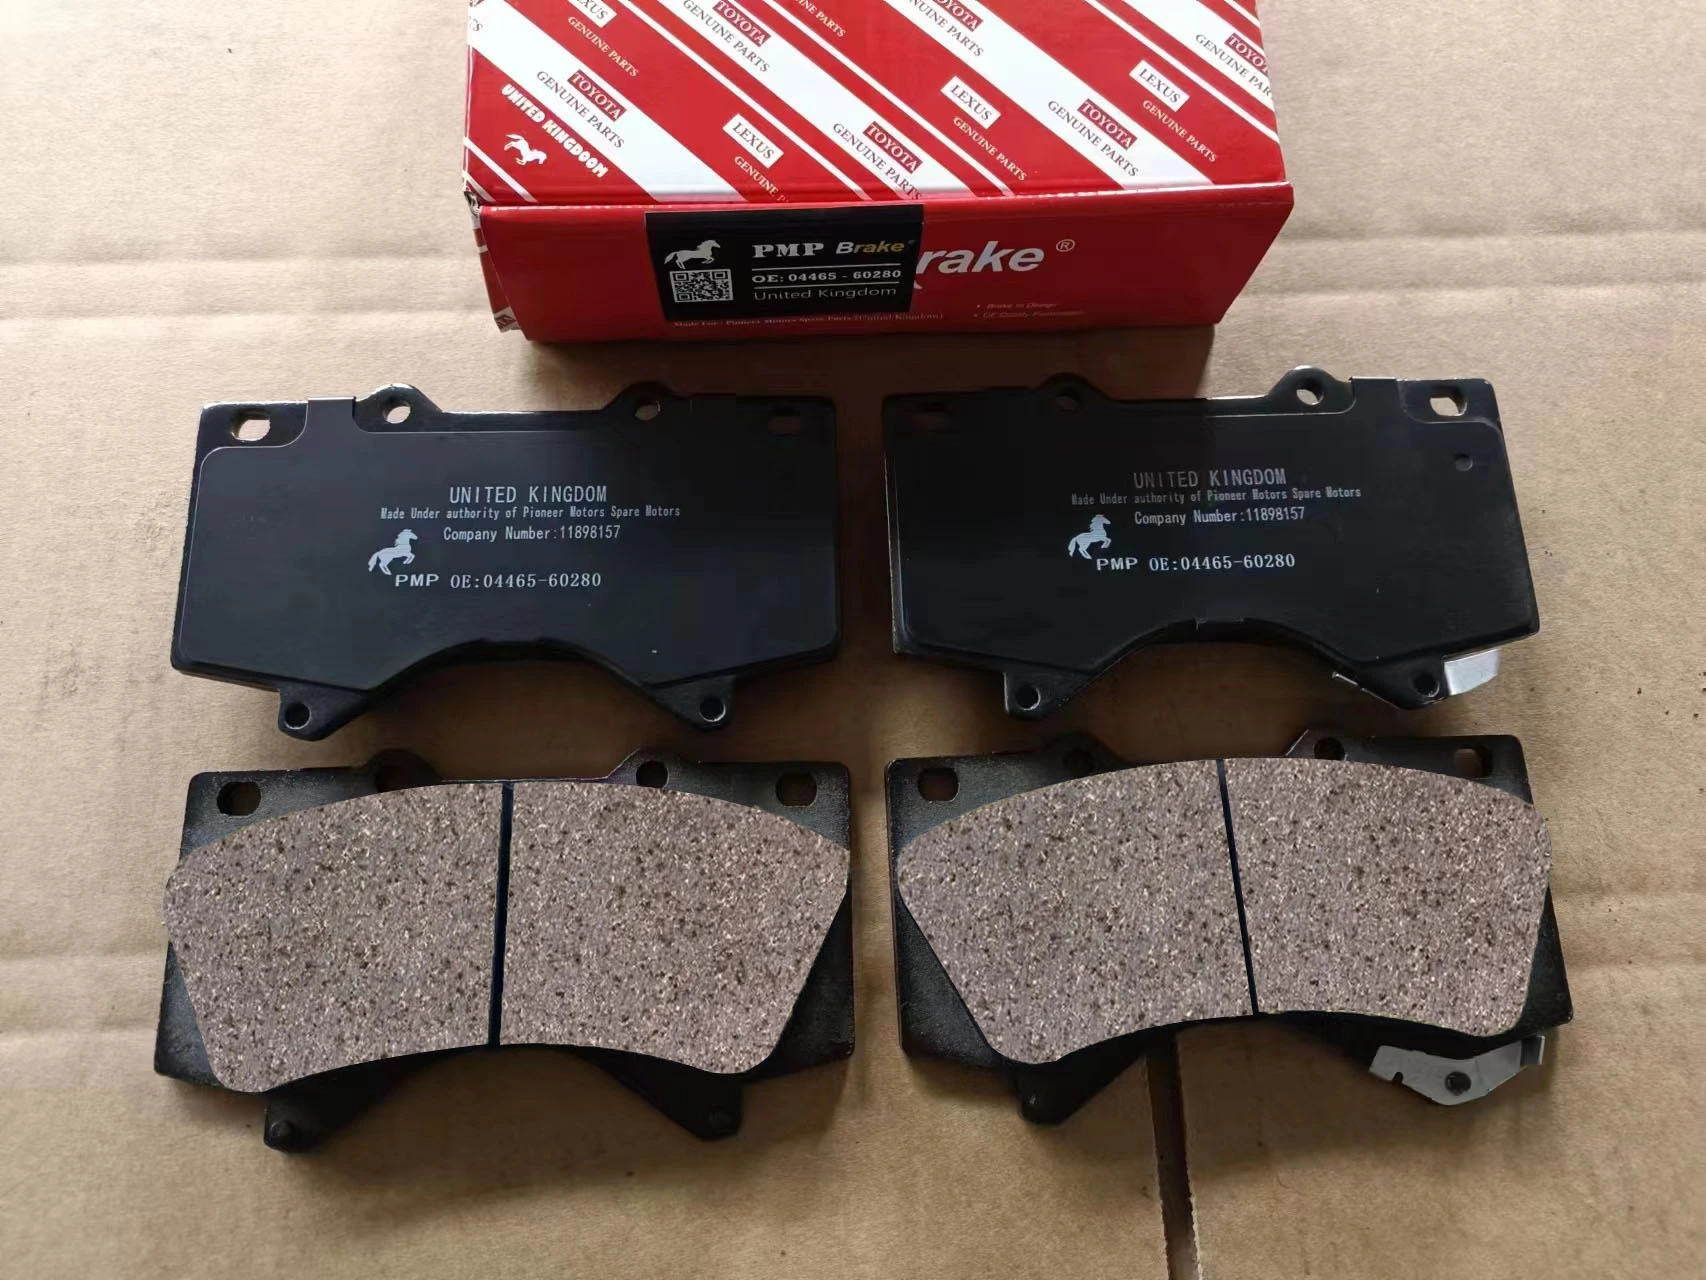 Durable semi metallic brake pads specifically made for Toyota Corolla, ensuring safety on the road.